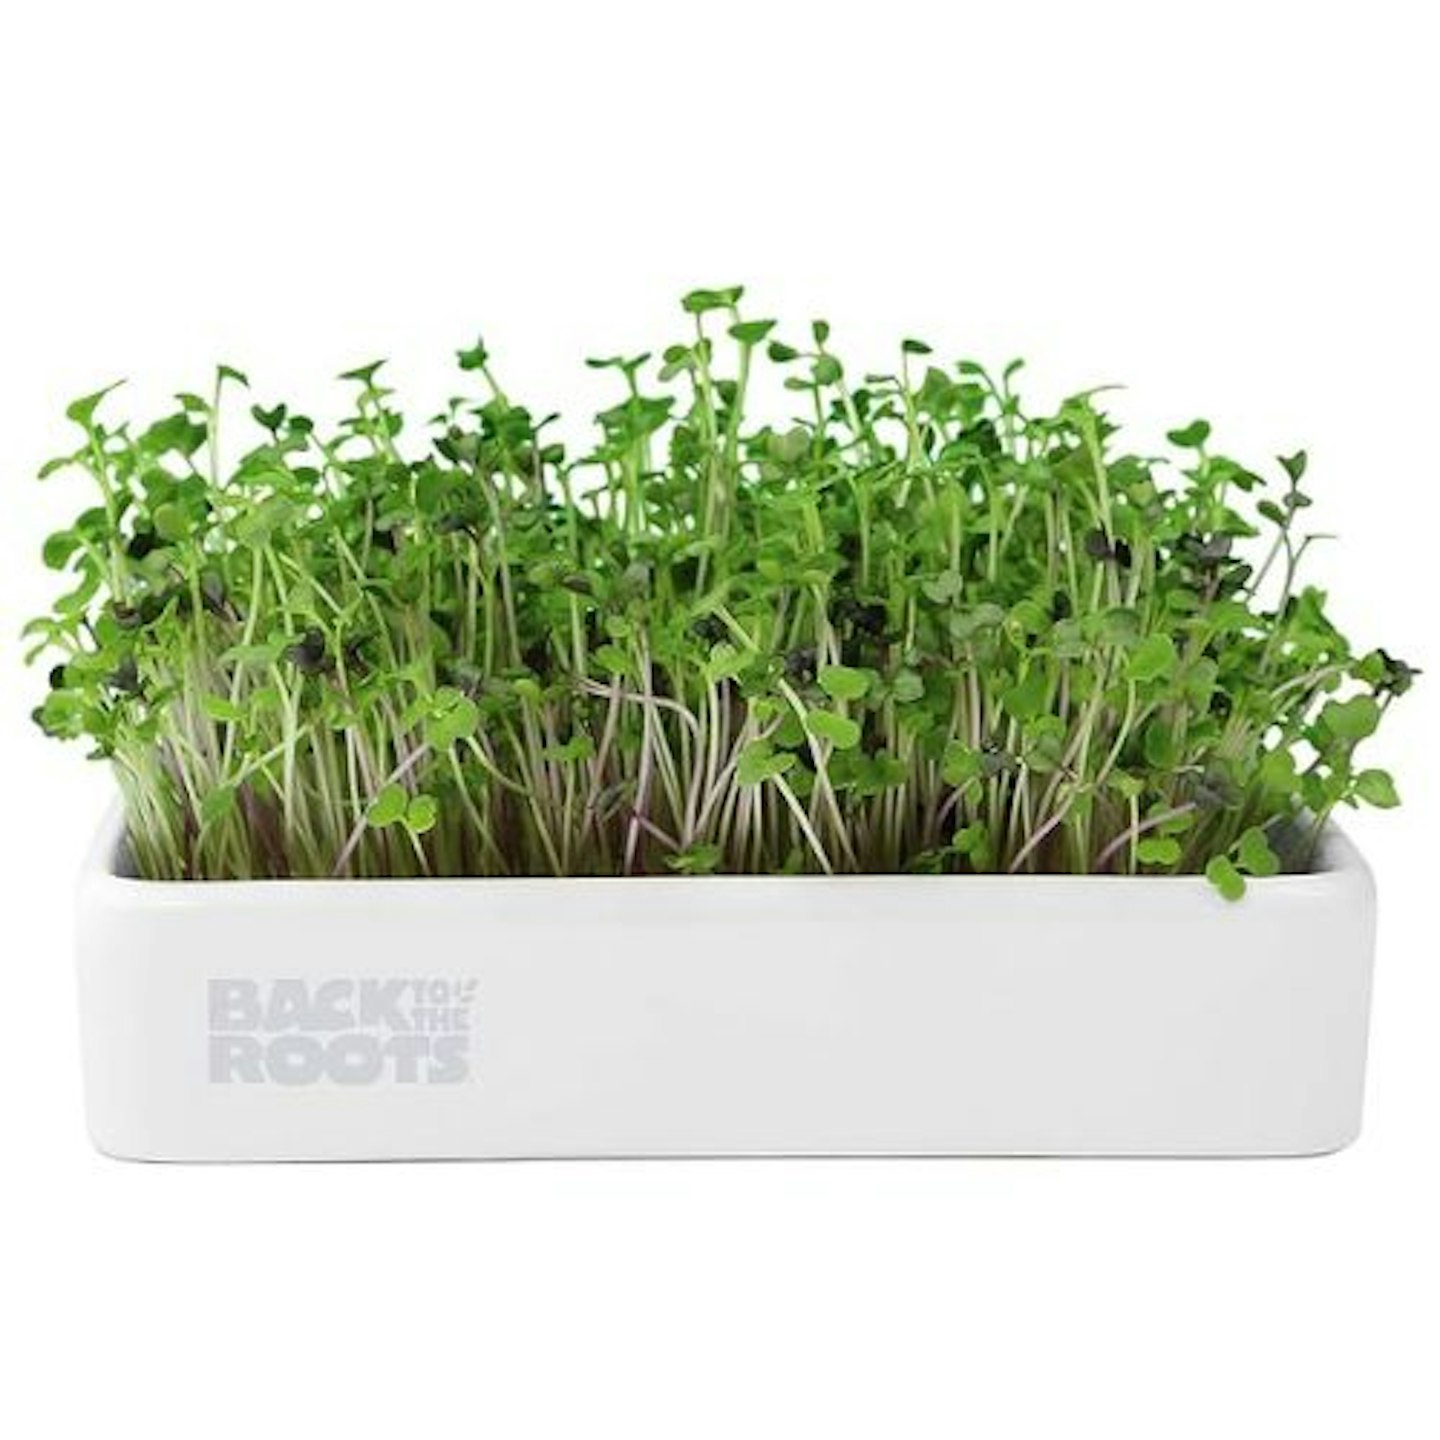 Back to the Roots 43002 Organic Microgreens Grow Kit with Ceramic Planter